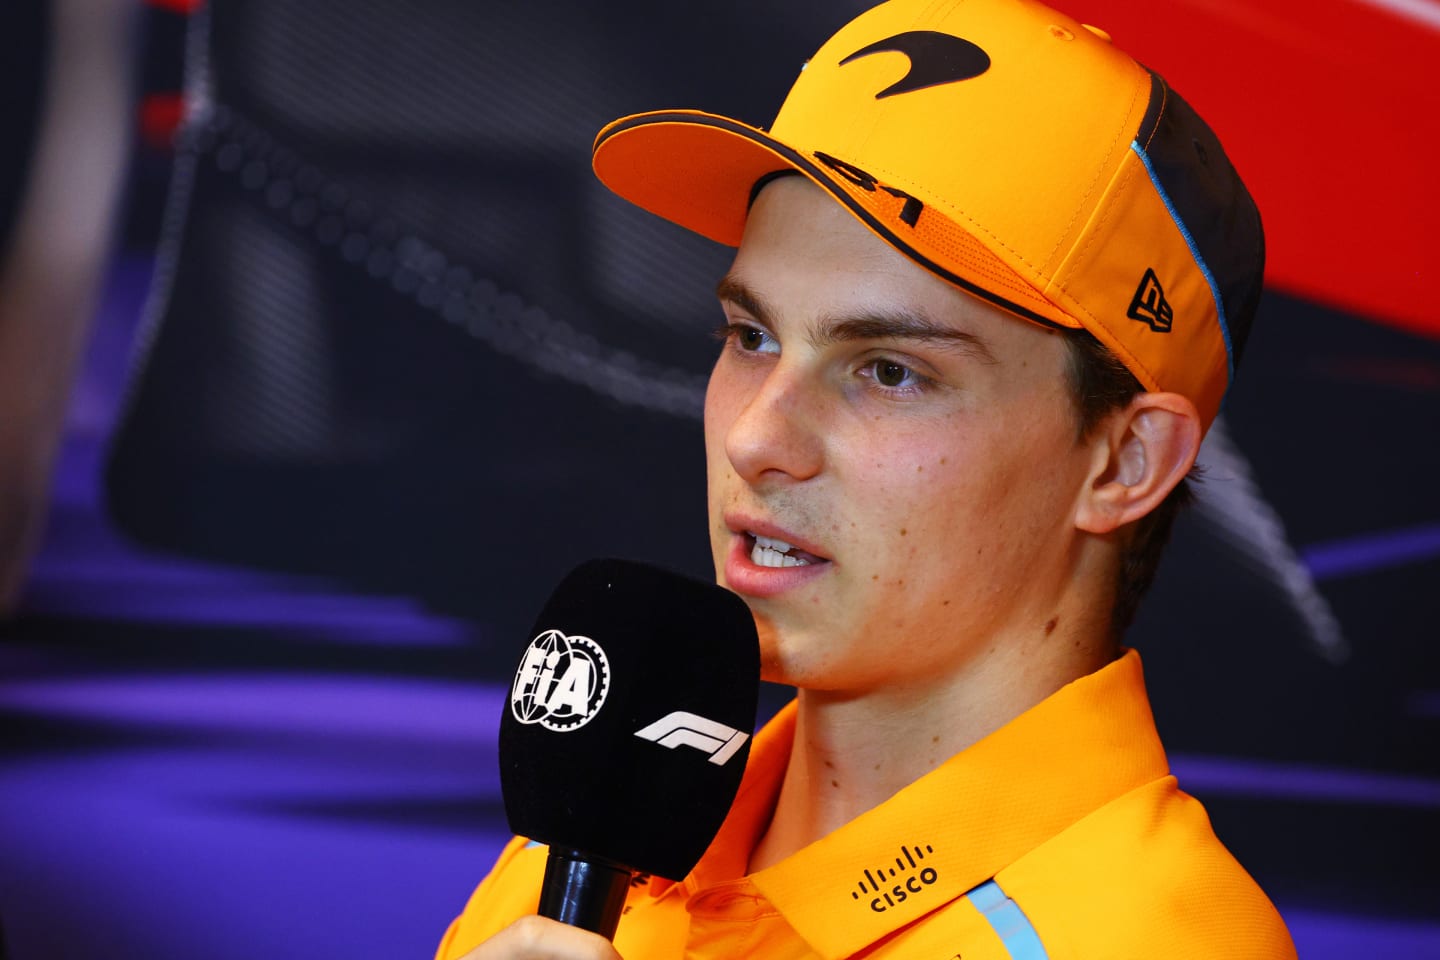 MONTREAL, QUEBEC - JUNE 06: Oscar Piastri of Australia and McLaren attends the press conference during previews ahead of the F1 Grand Prix of Canada at Circuit Gilles Villeneuve on June 06, 2024 in Montreal, Quebec. (Photo by Clive Rose/Getty Images)